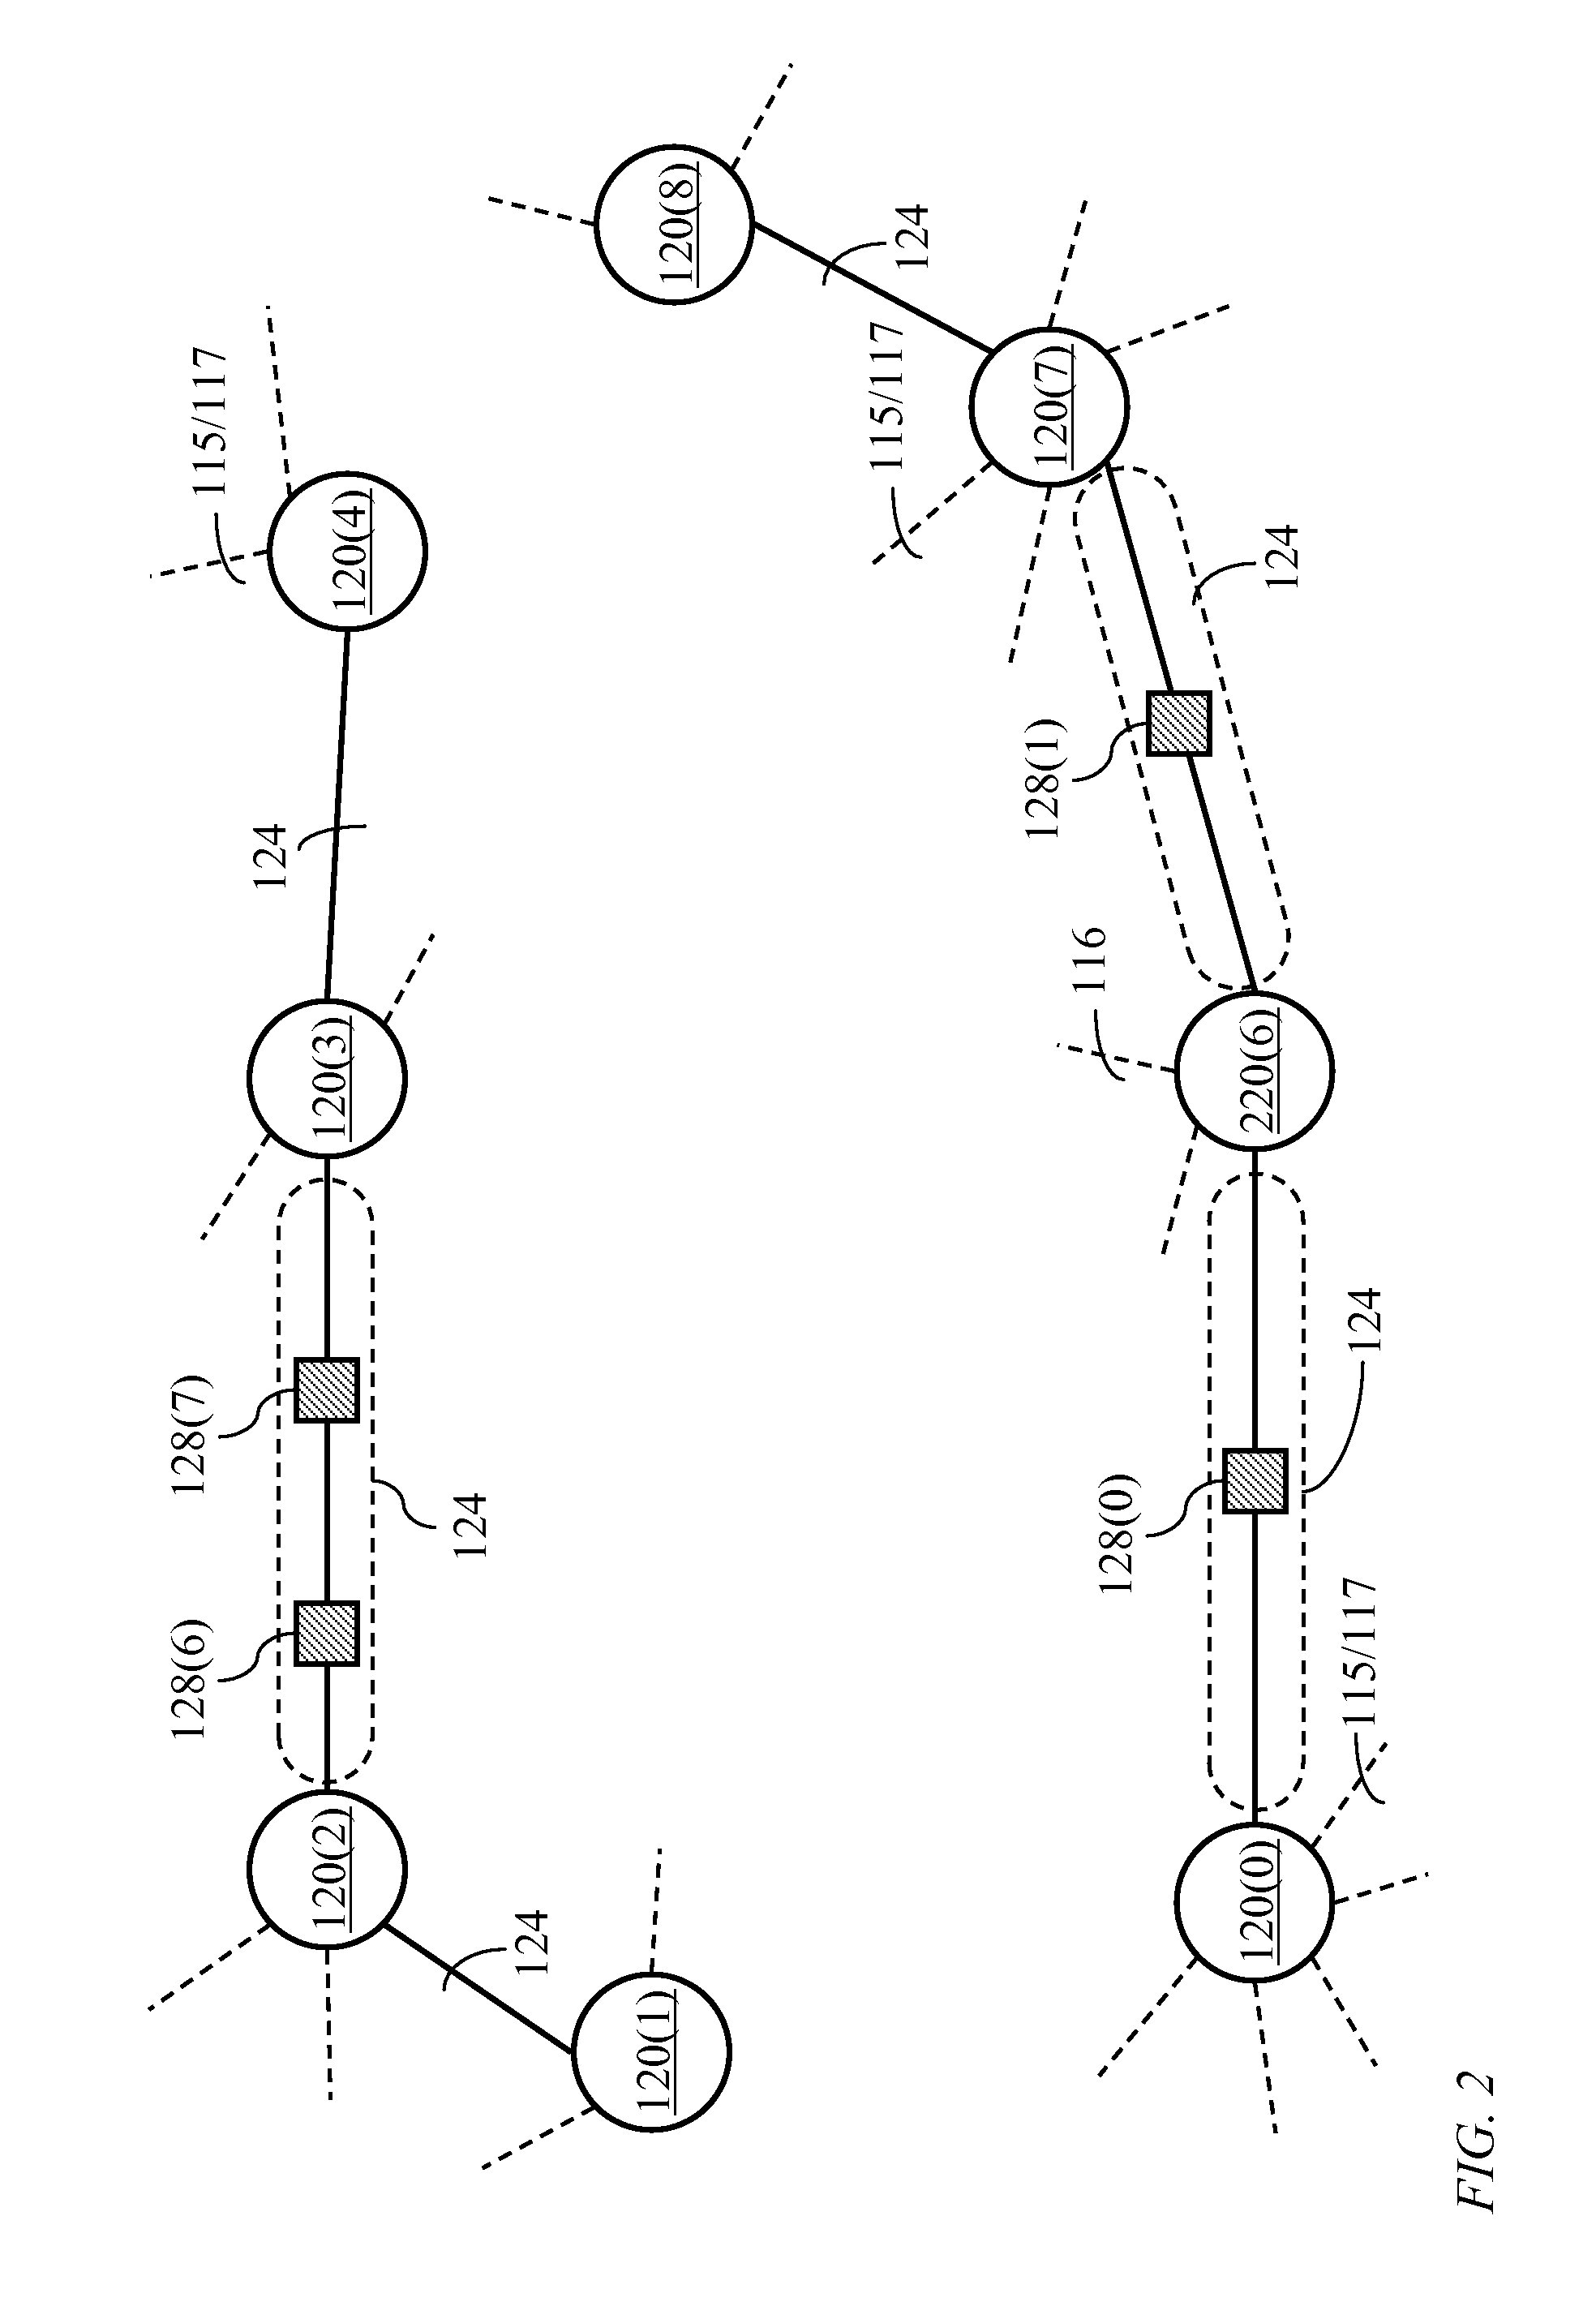 Method and system for distributed measurement and compensation of chromatic dispersion in an optical network